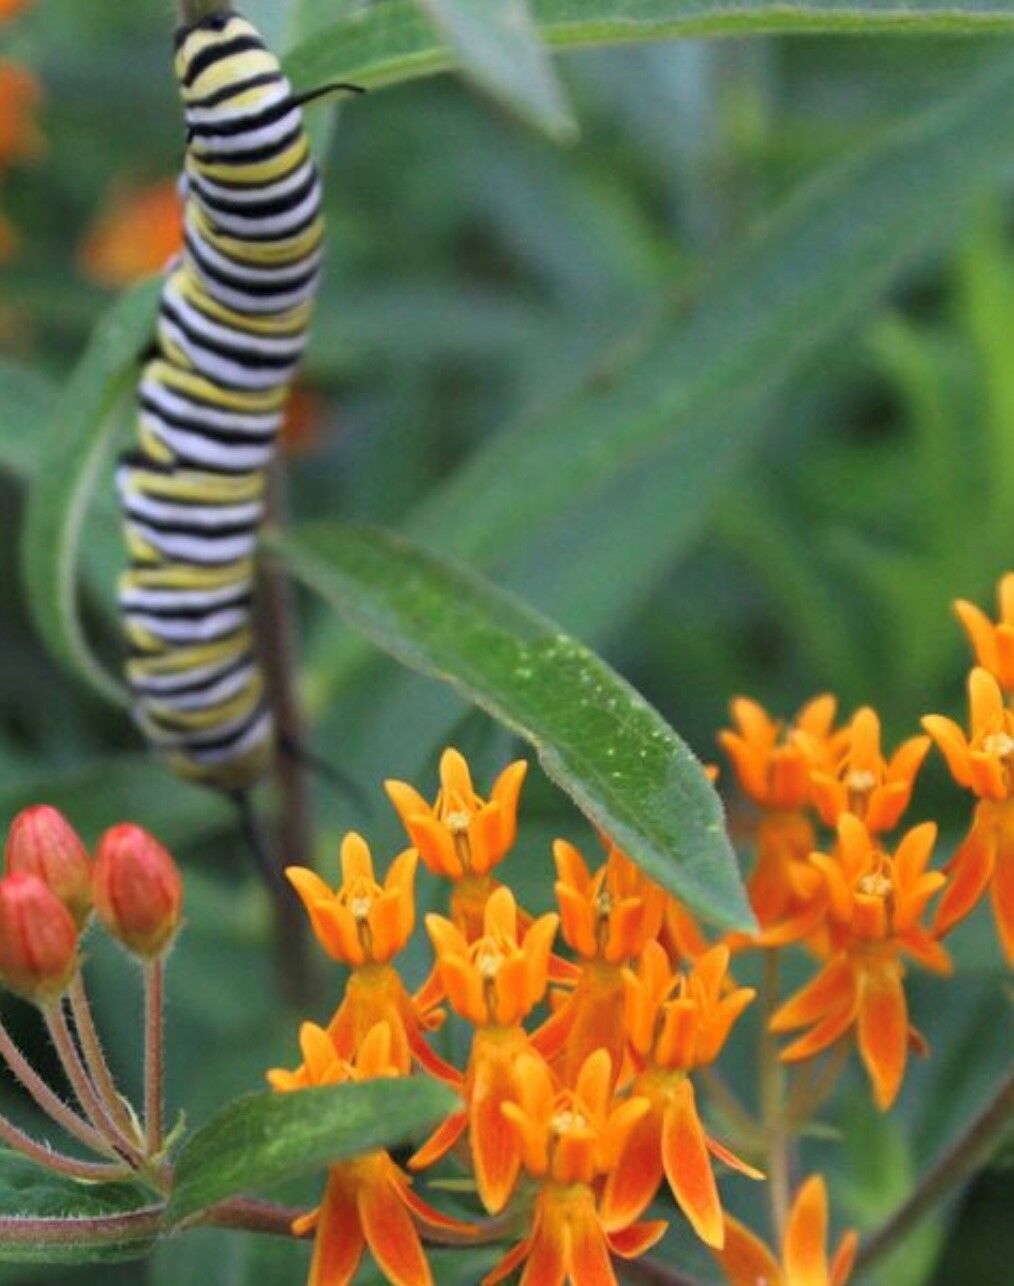 Caterpillar on a butterfly weed photo